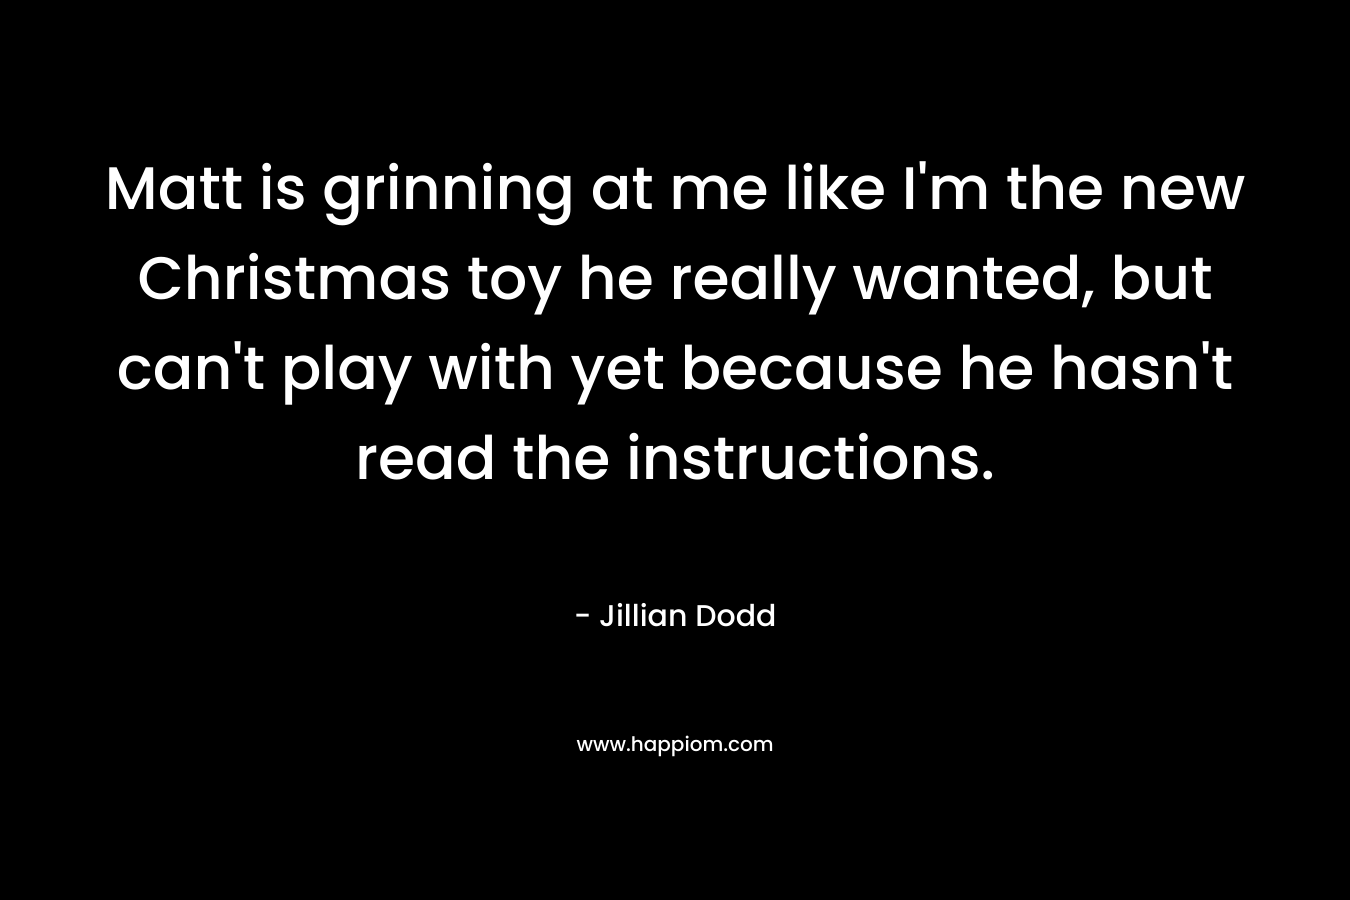 Matt is grinning at me like I’m the new Christmas toy he really wanted, but can’t play with yet because he hasn’t read the instructions. – Jillian Dodd